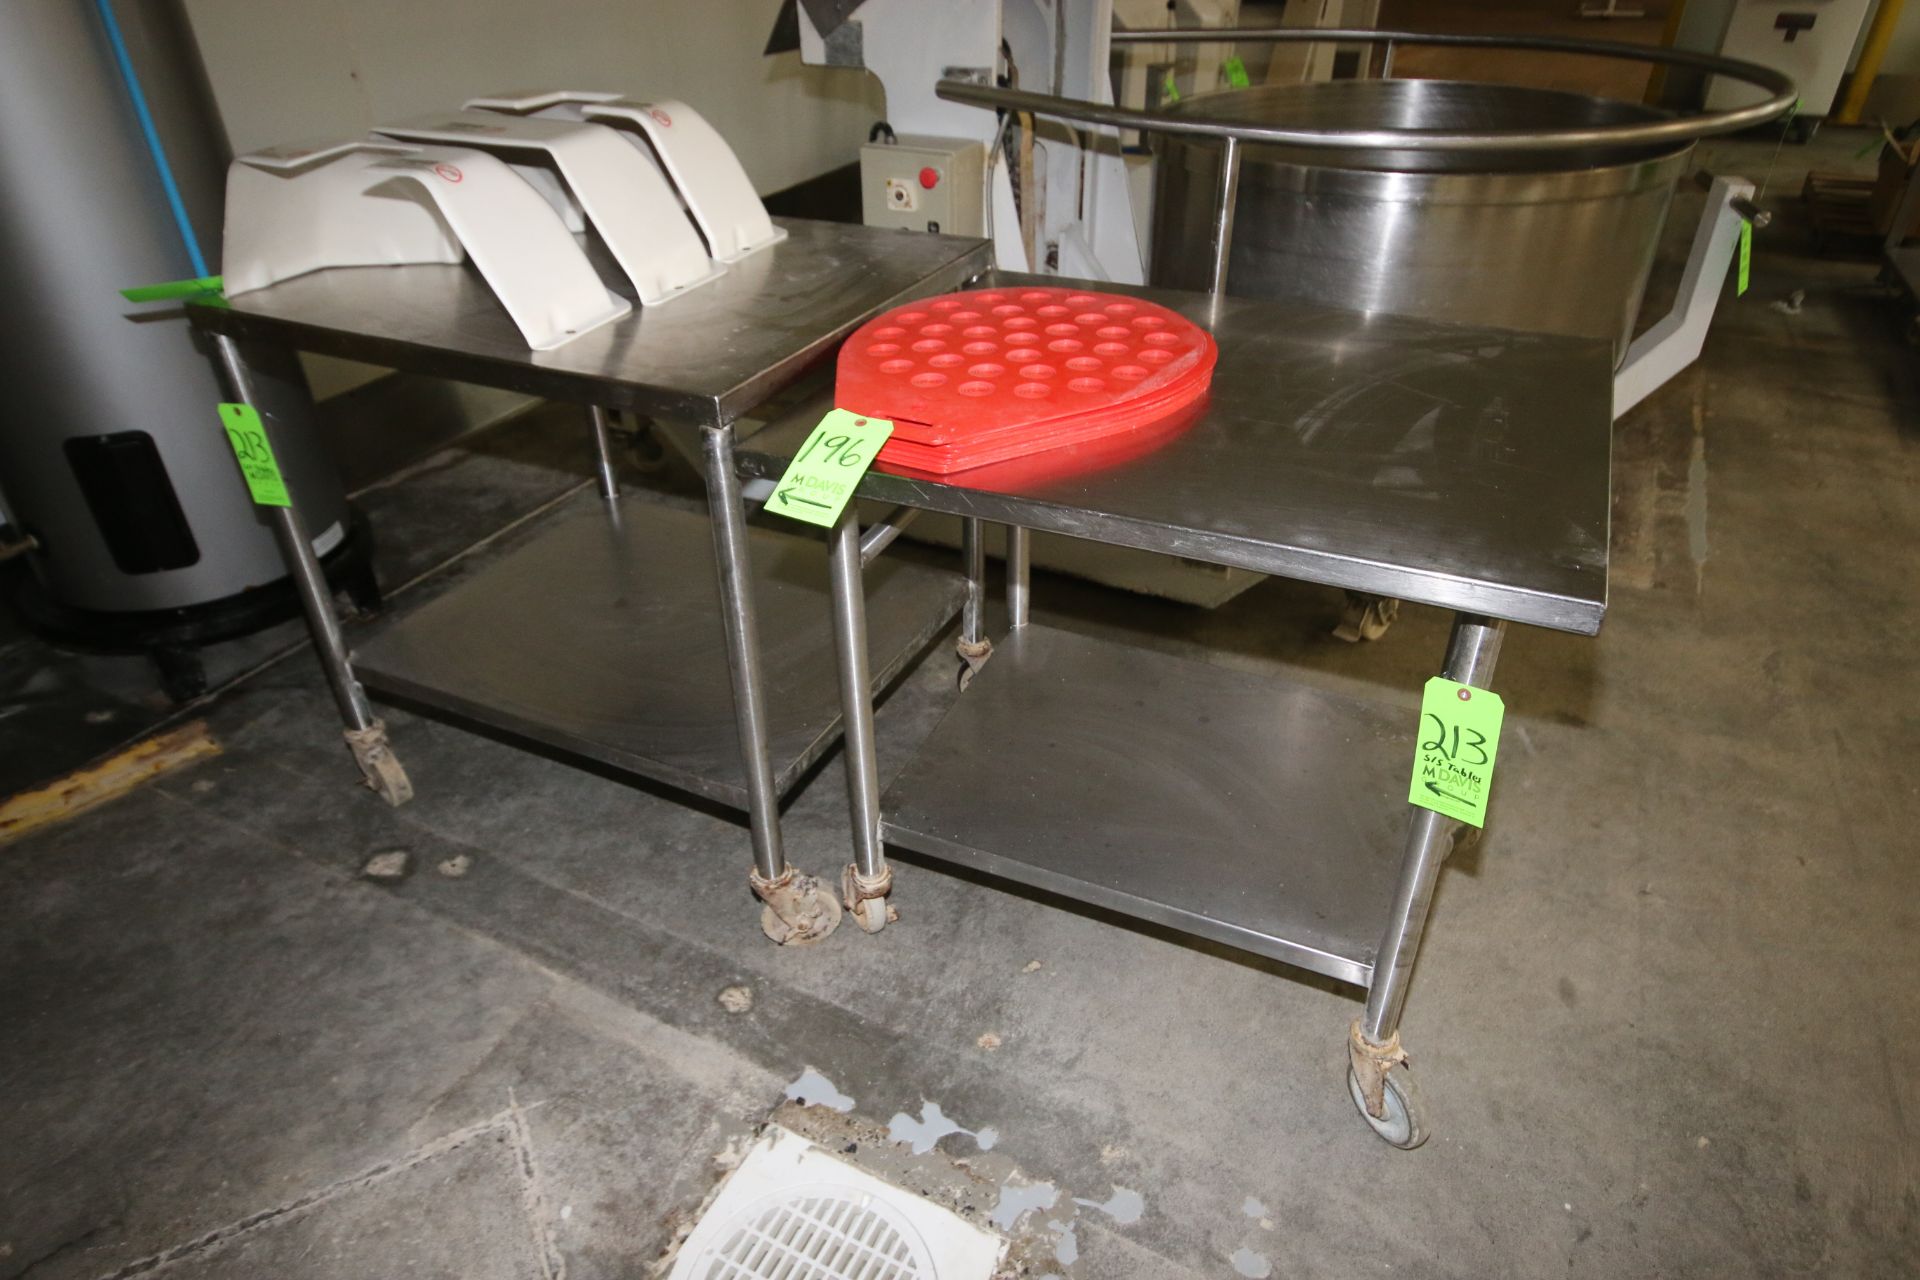 S/S Portable Tables, with S/S Bottom Shelves, Overall Dims.: Aprox. 36" L x 34" W x 30" H (LOCATED